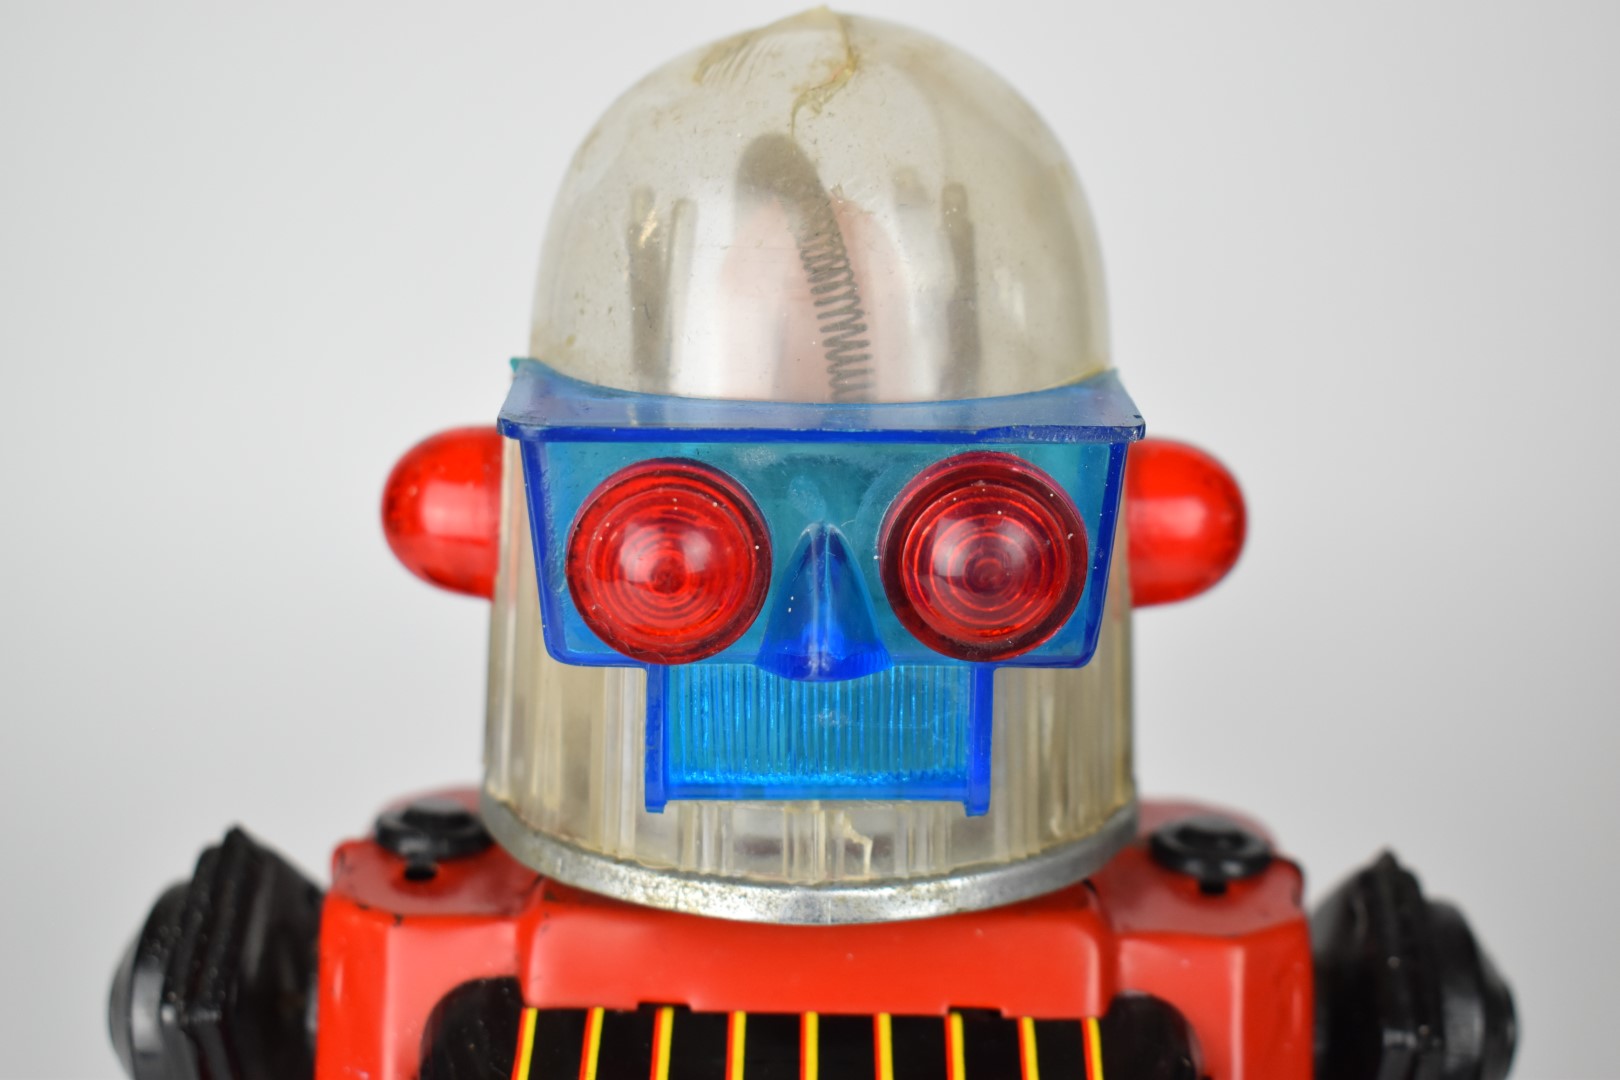 Japanese battery operated tinplate 'Cragstans Mr. Robot' by Yonezawa (Japan), height 28cm. - Image 6 of 7